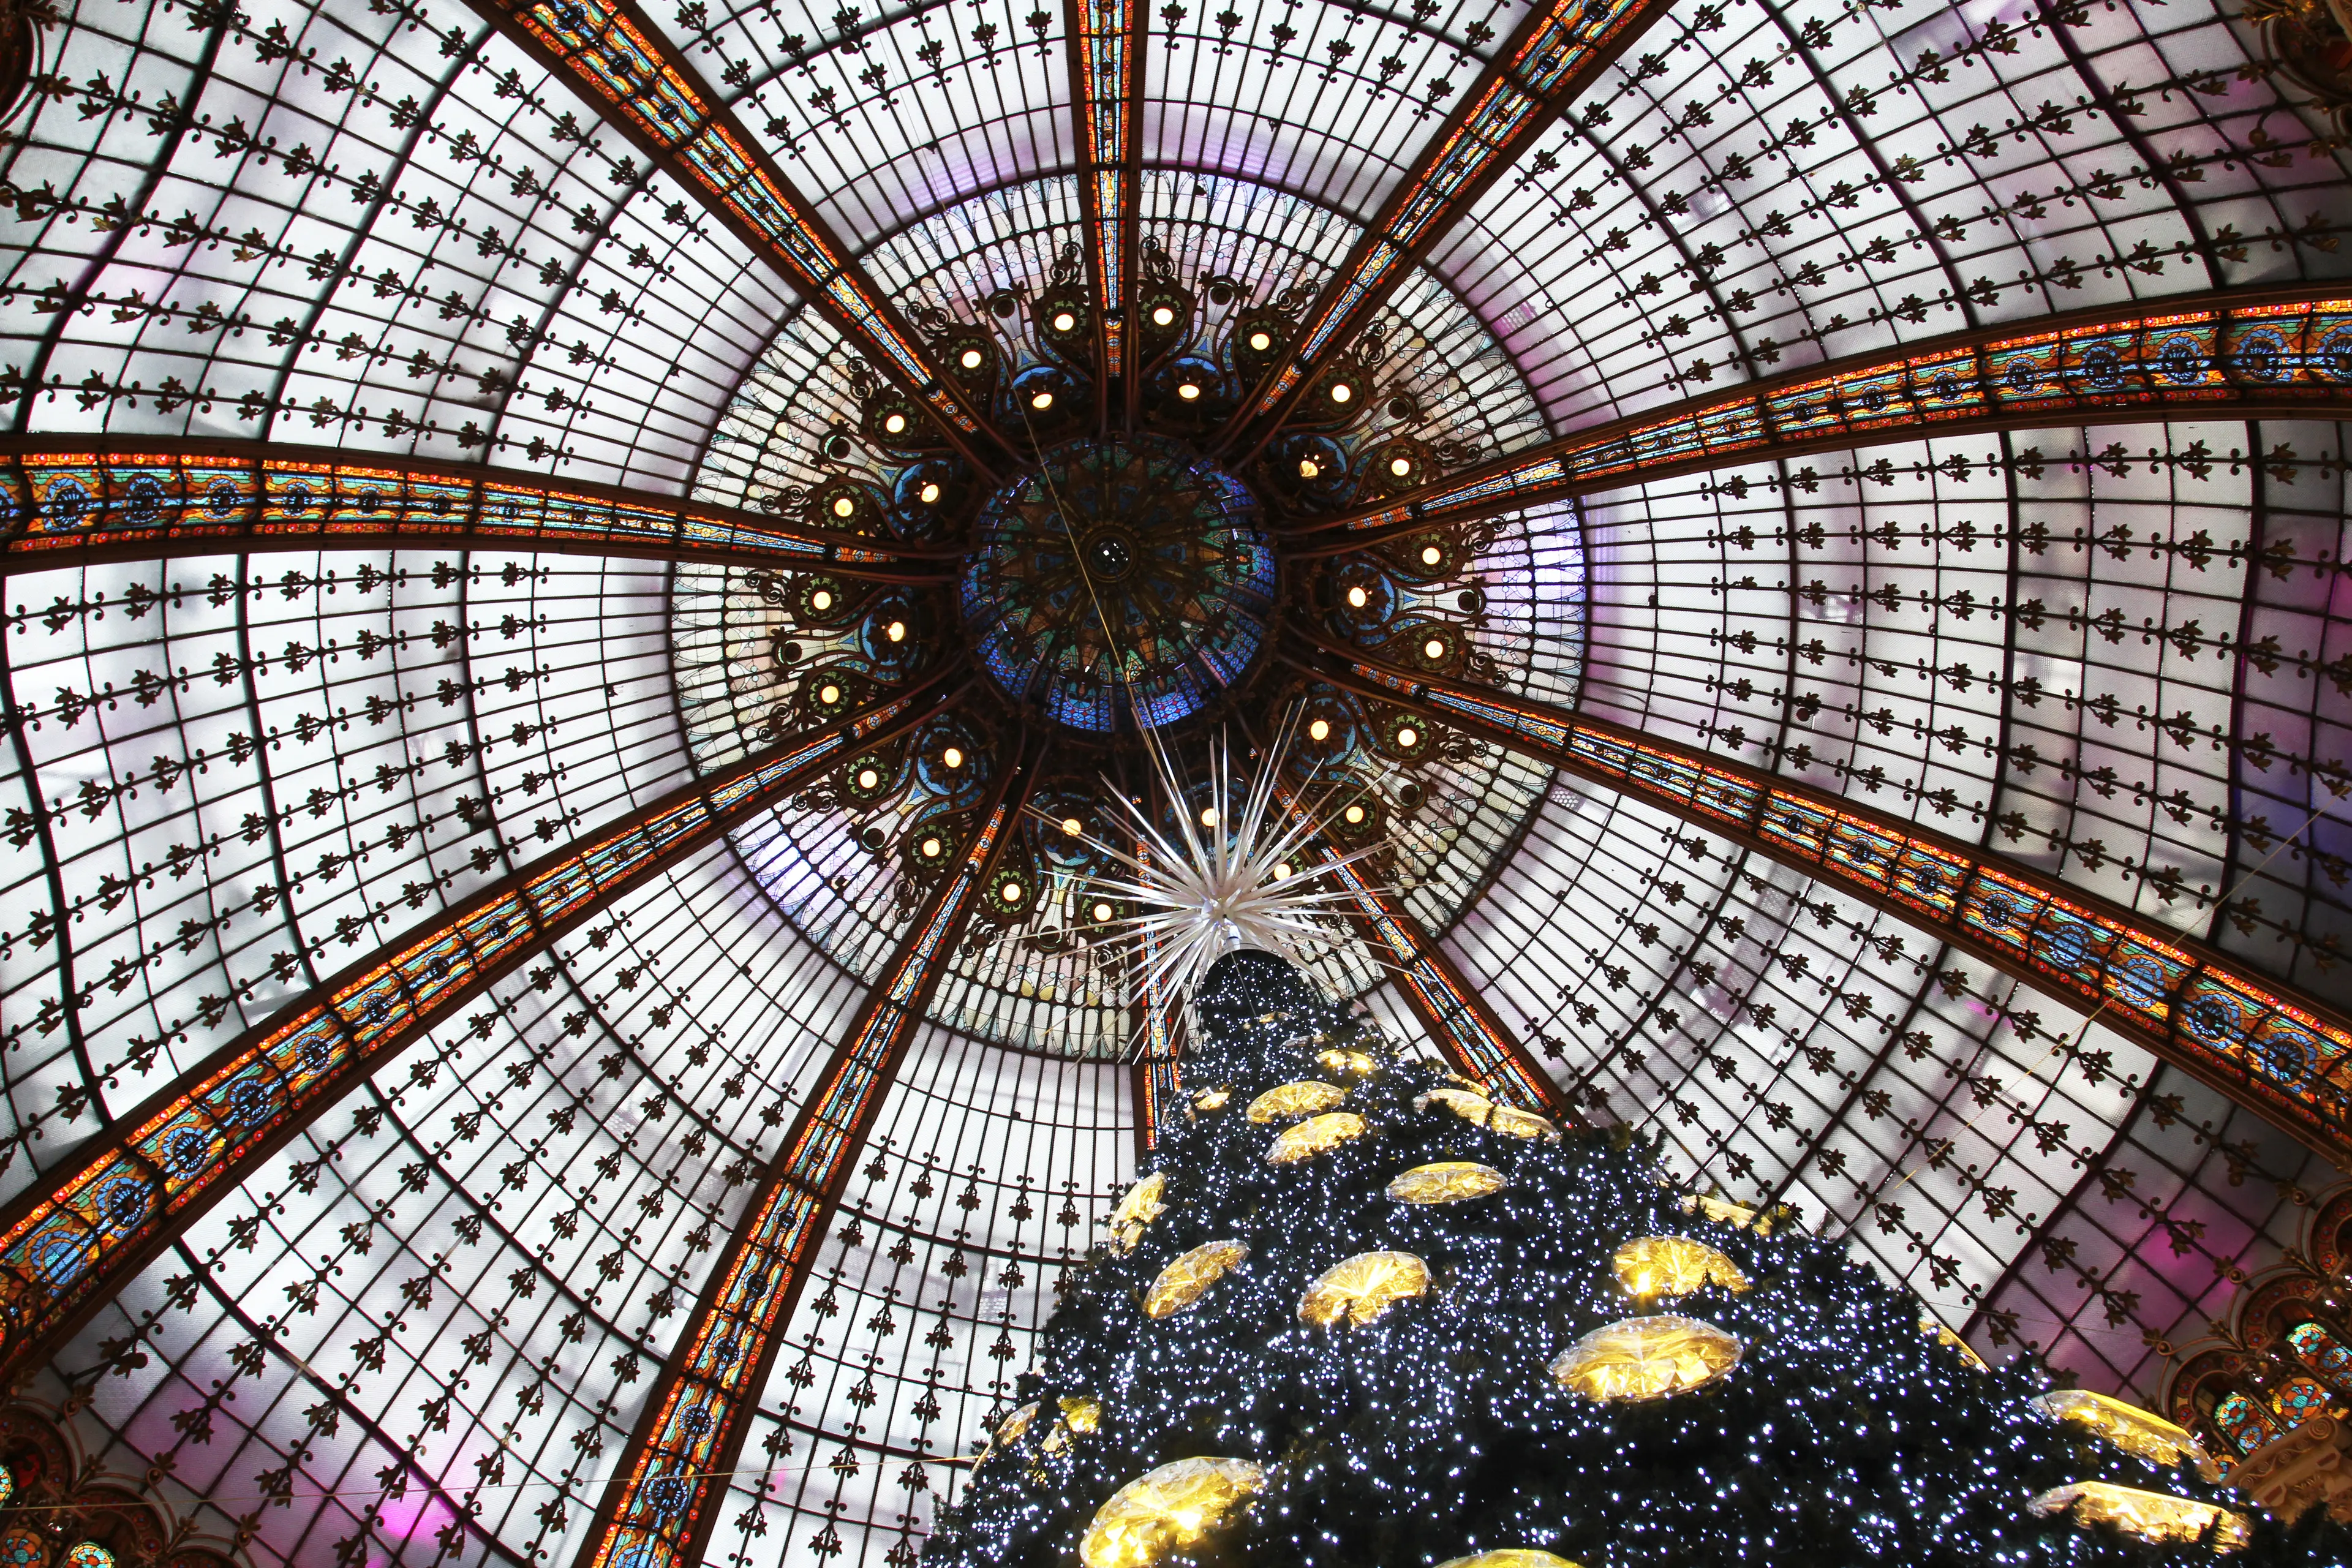 The Christmas tree at Galleries Lafayette